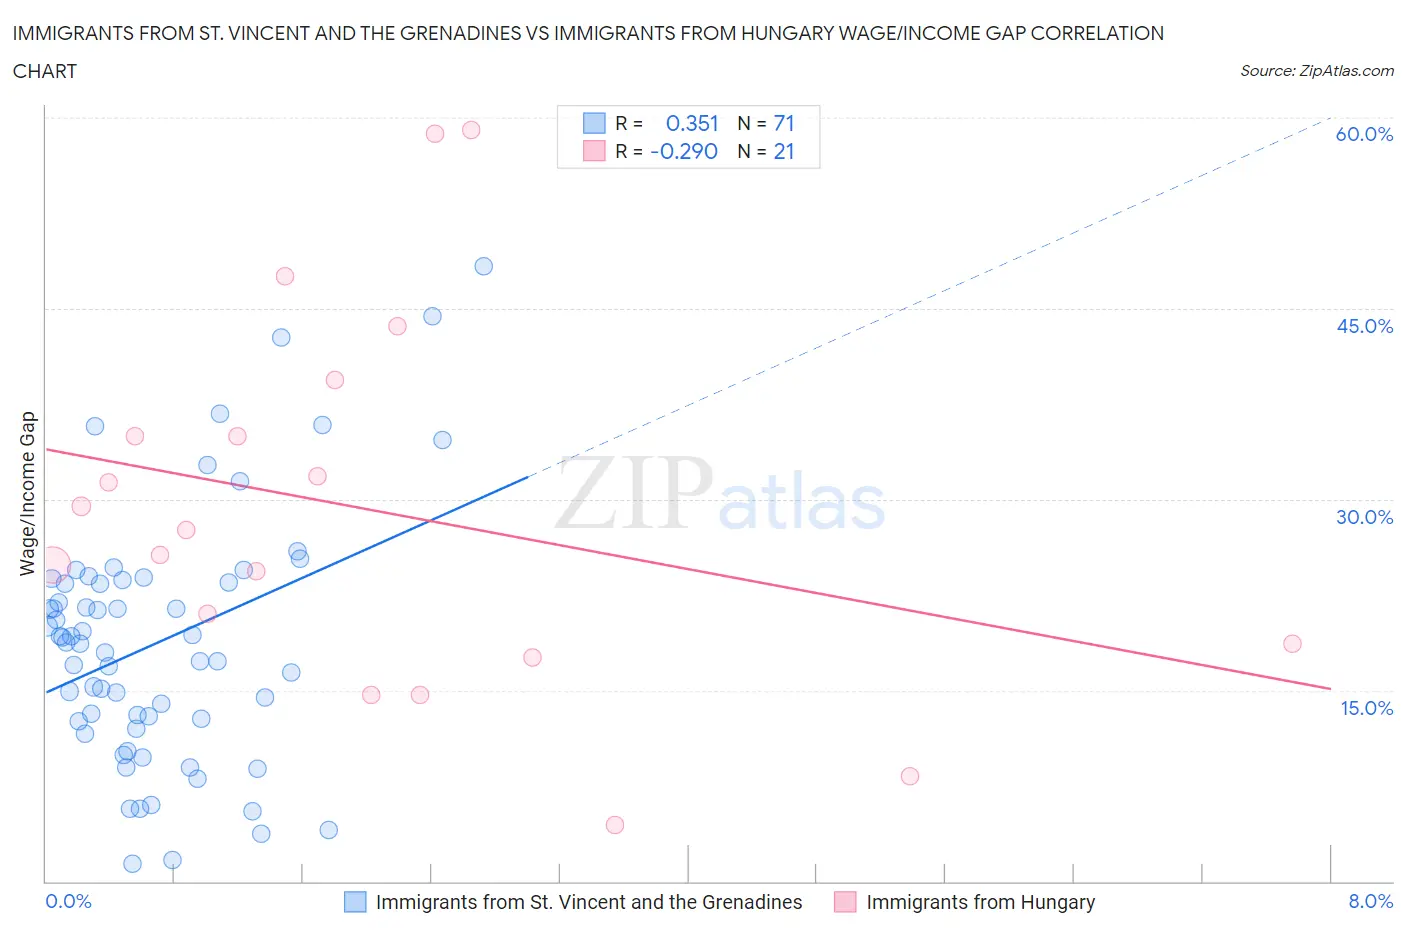 Immigrants from St. Vincent and the Grenadines vs Immigrants from Hungary Wage/Income Gap